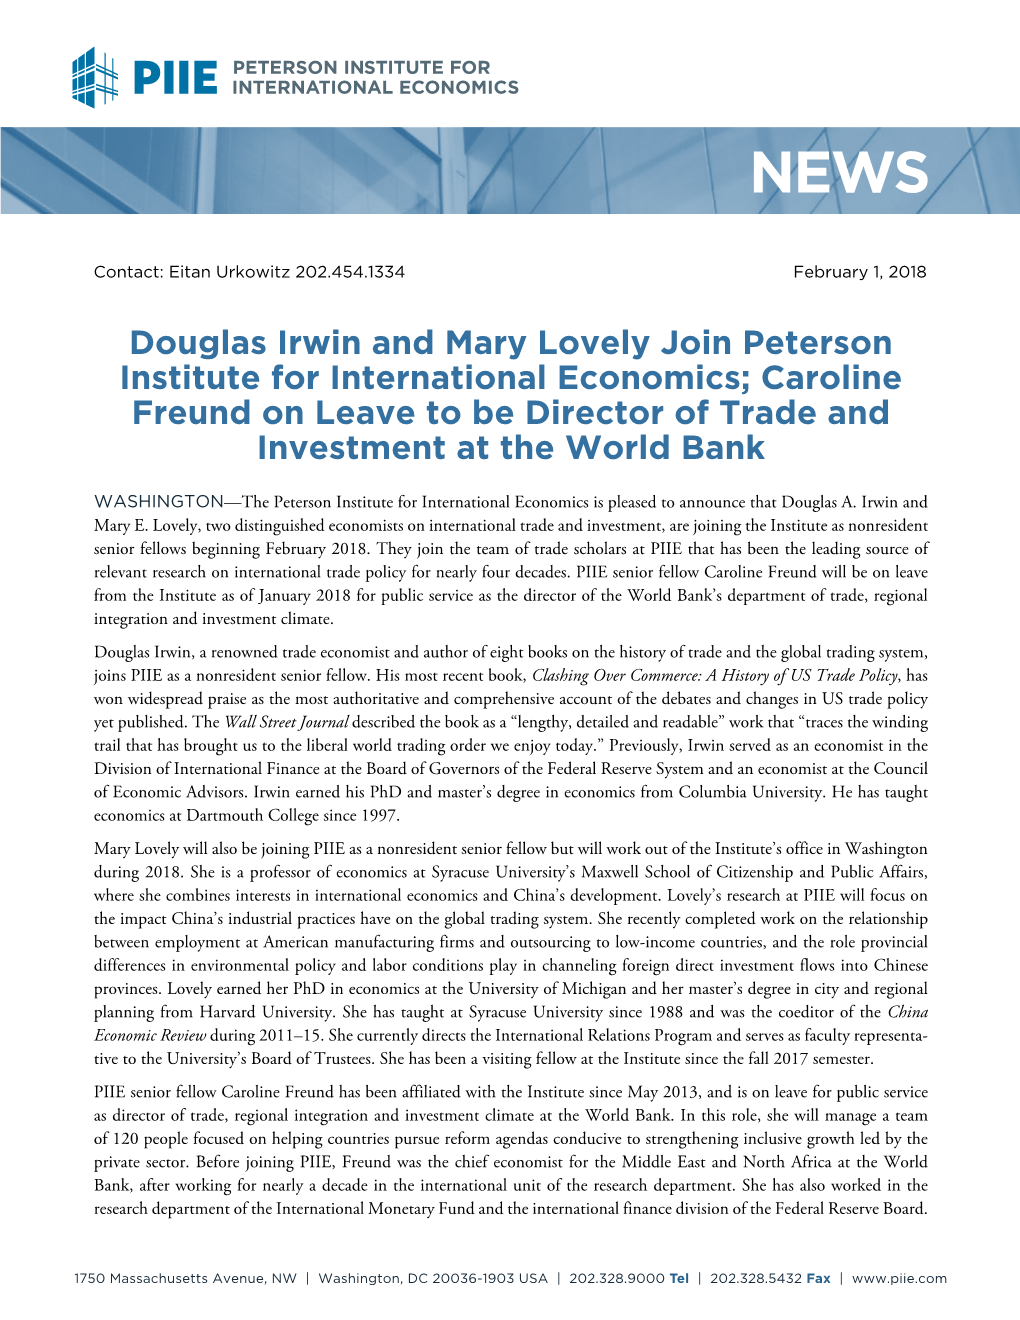 Douglas Irwin and Mary Lovely Join Peterson Institute for International Economics; Caroline Freund on Leave to Be Director of Trade and Investment at the World Bank